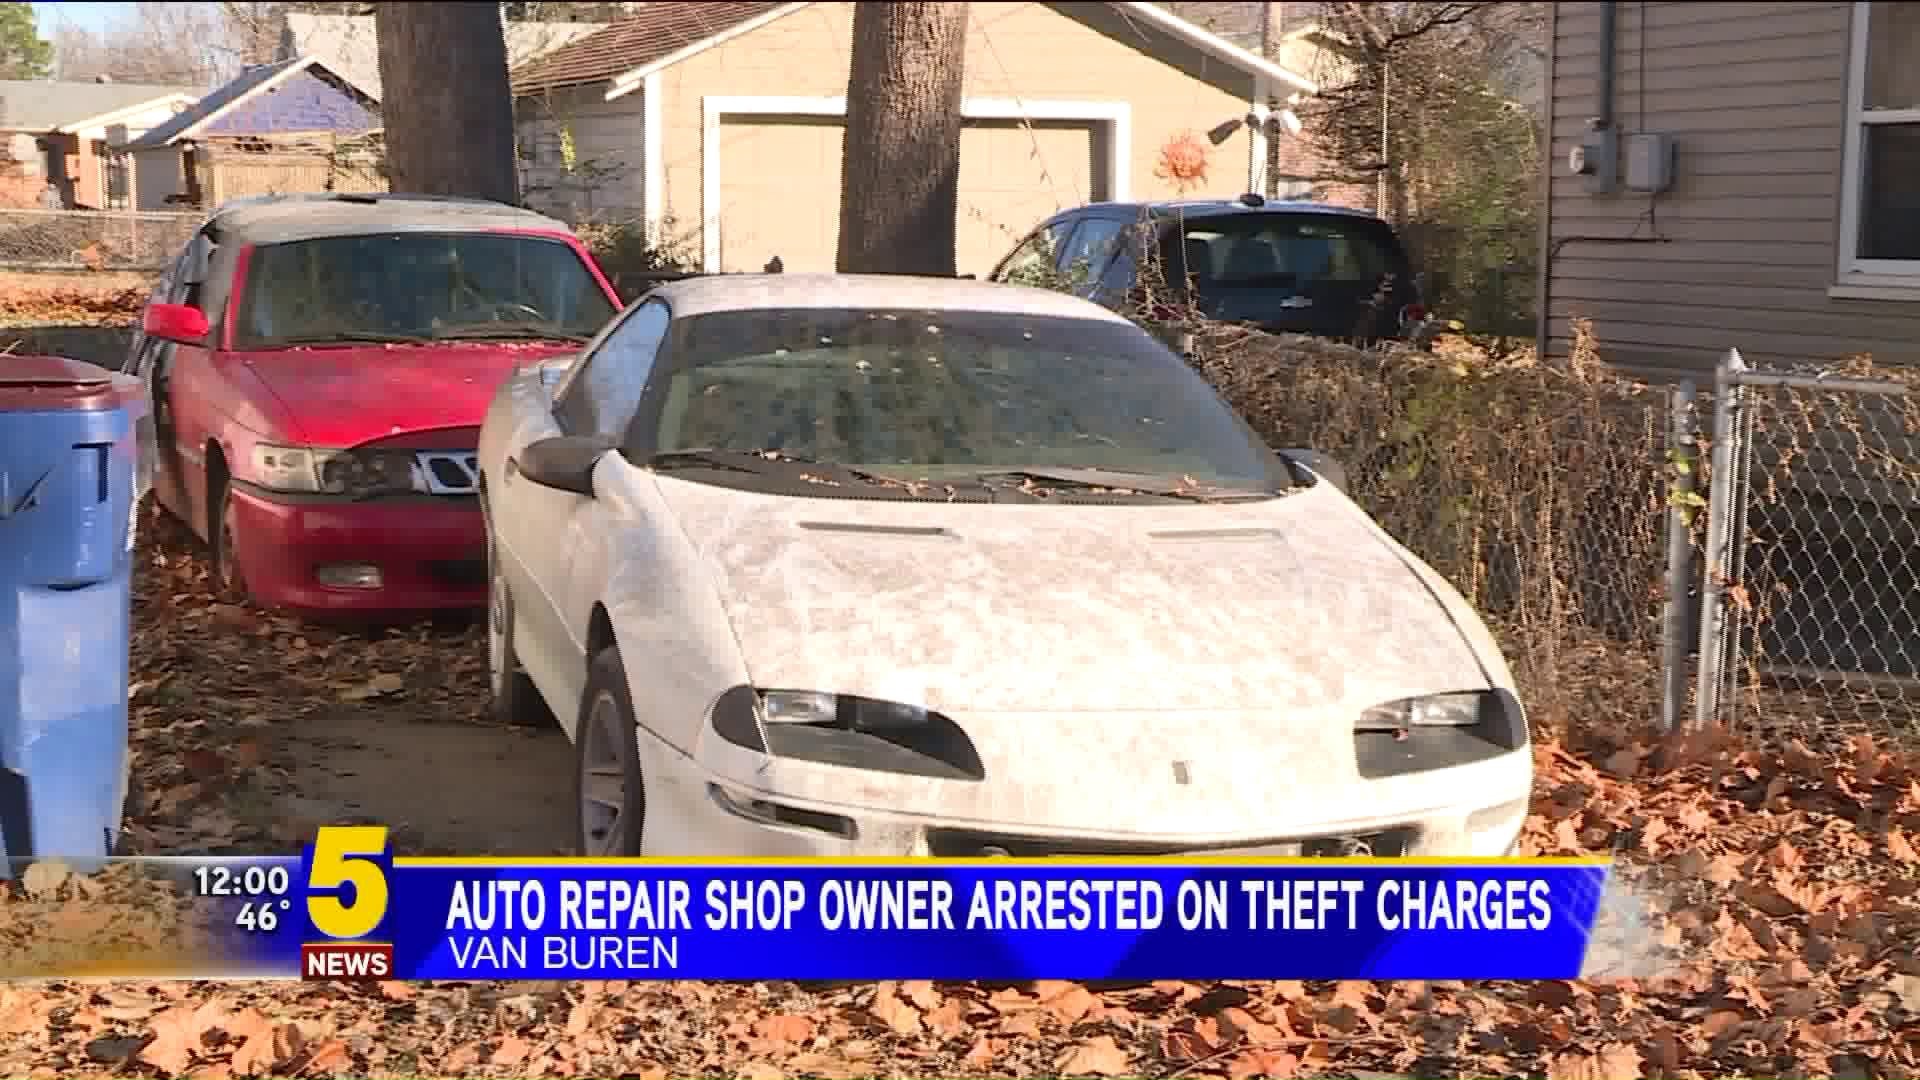 Auto Repair Shop Owner Accused Of Stealing From Customers